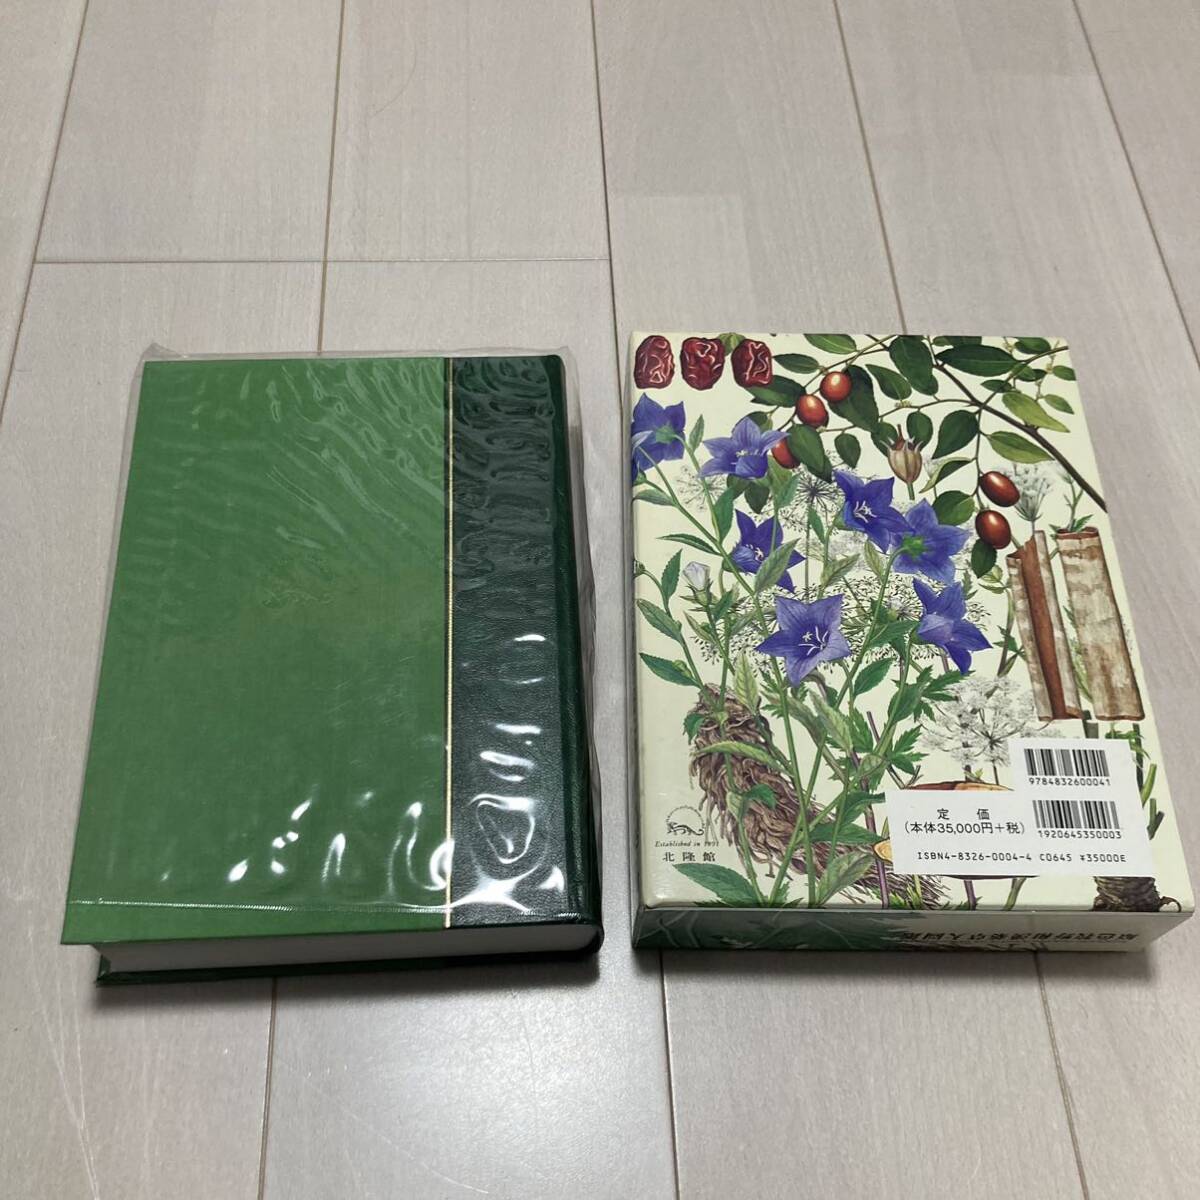 J Heisei era 10 year issue [. color .. peace . medicinal herbs large ..]